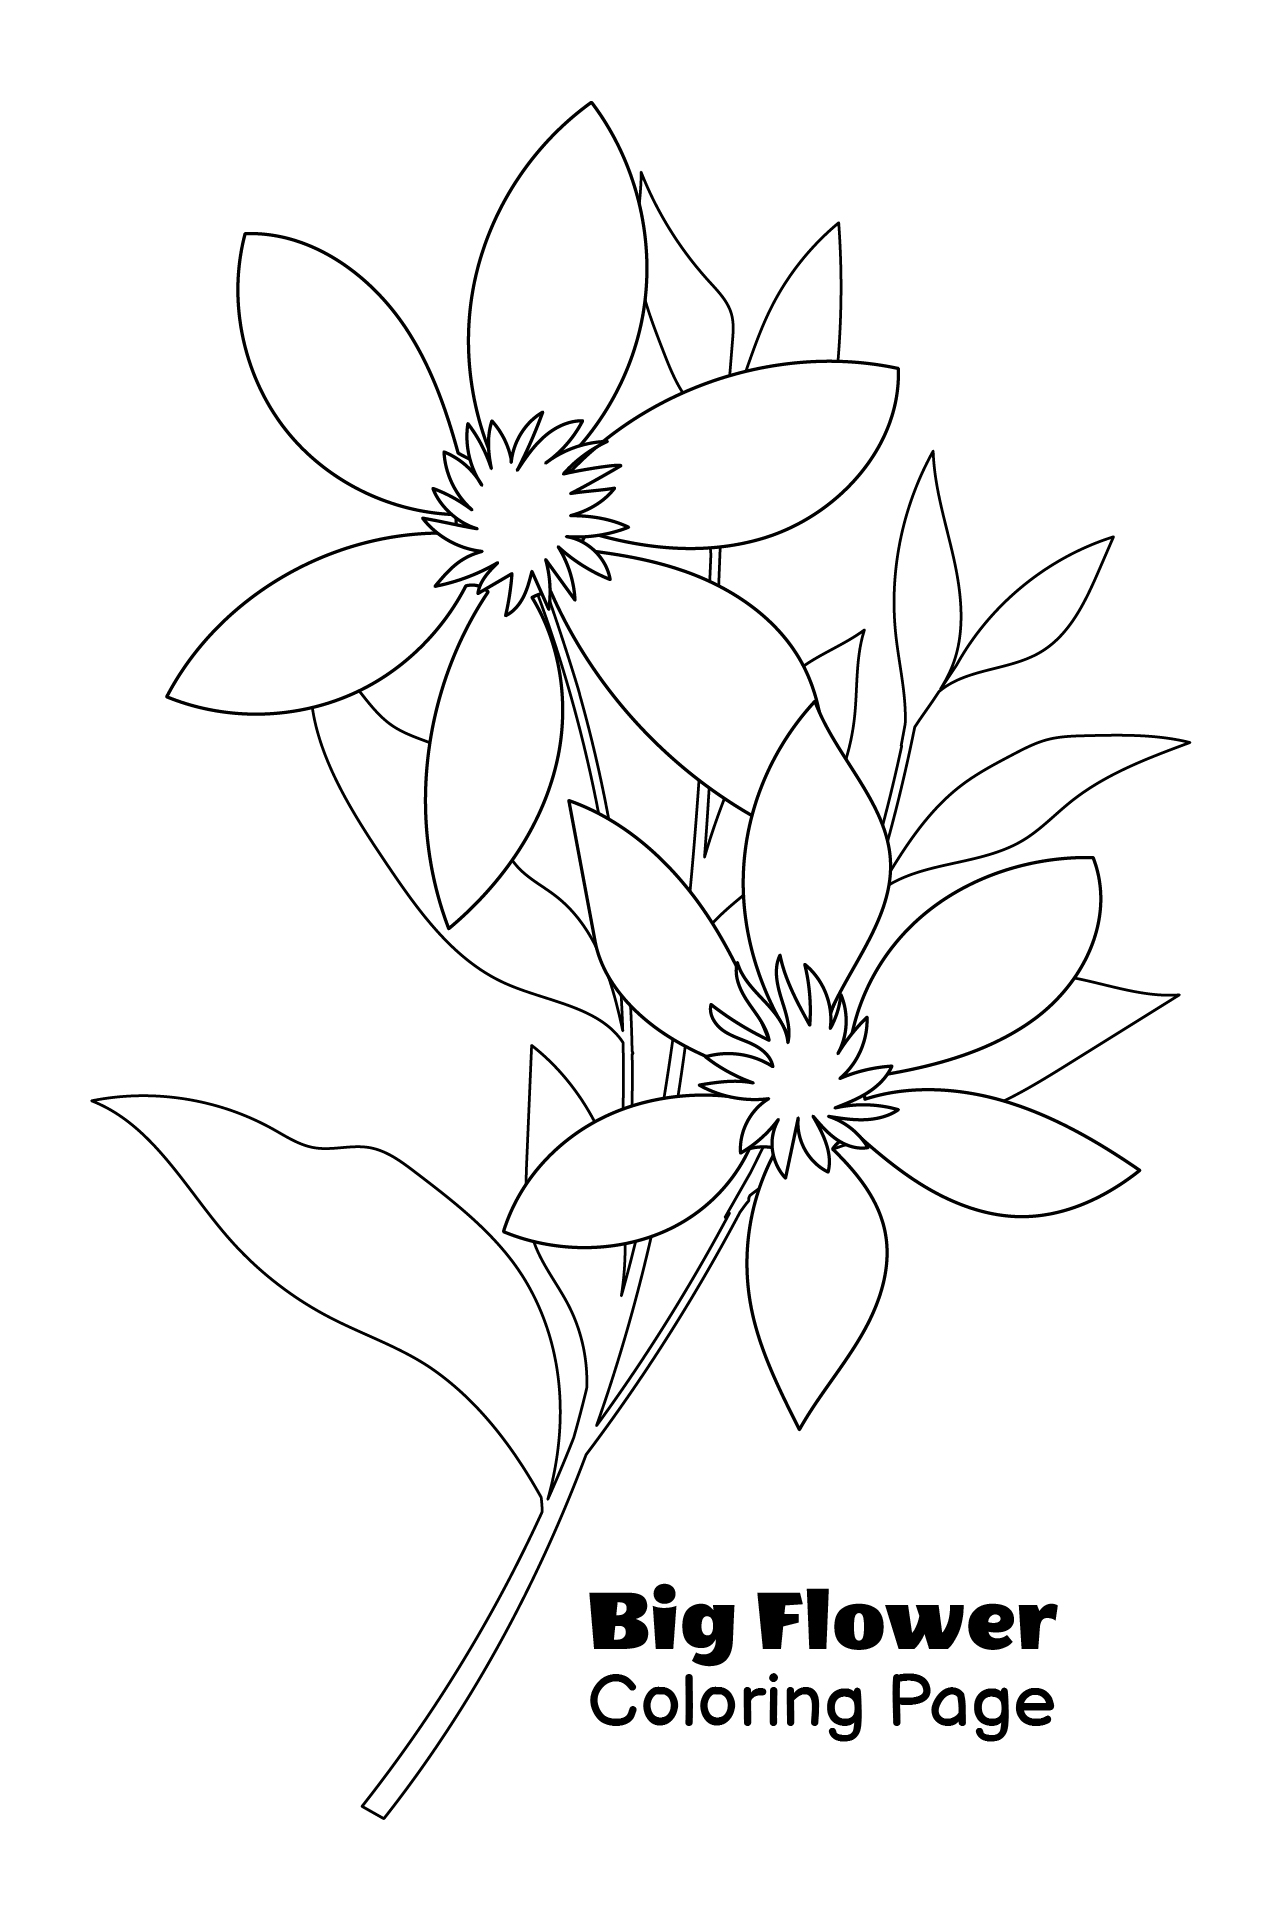 Coloring Page Of Big Flower